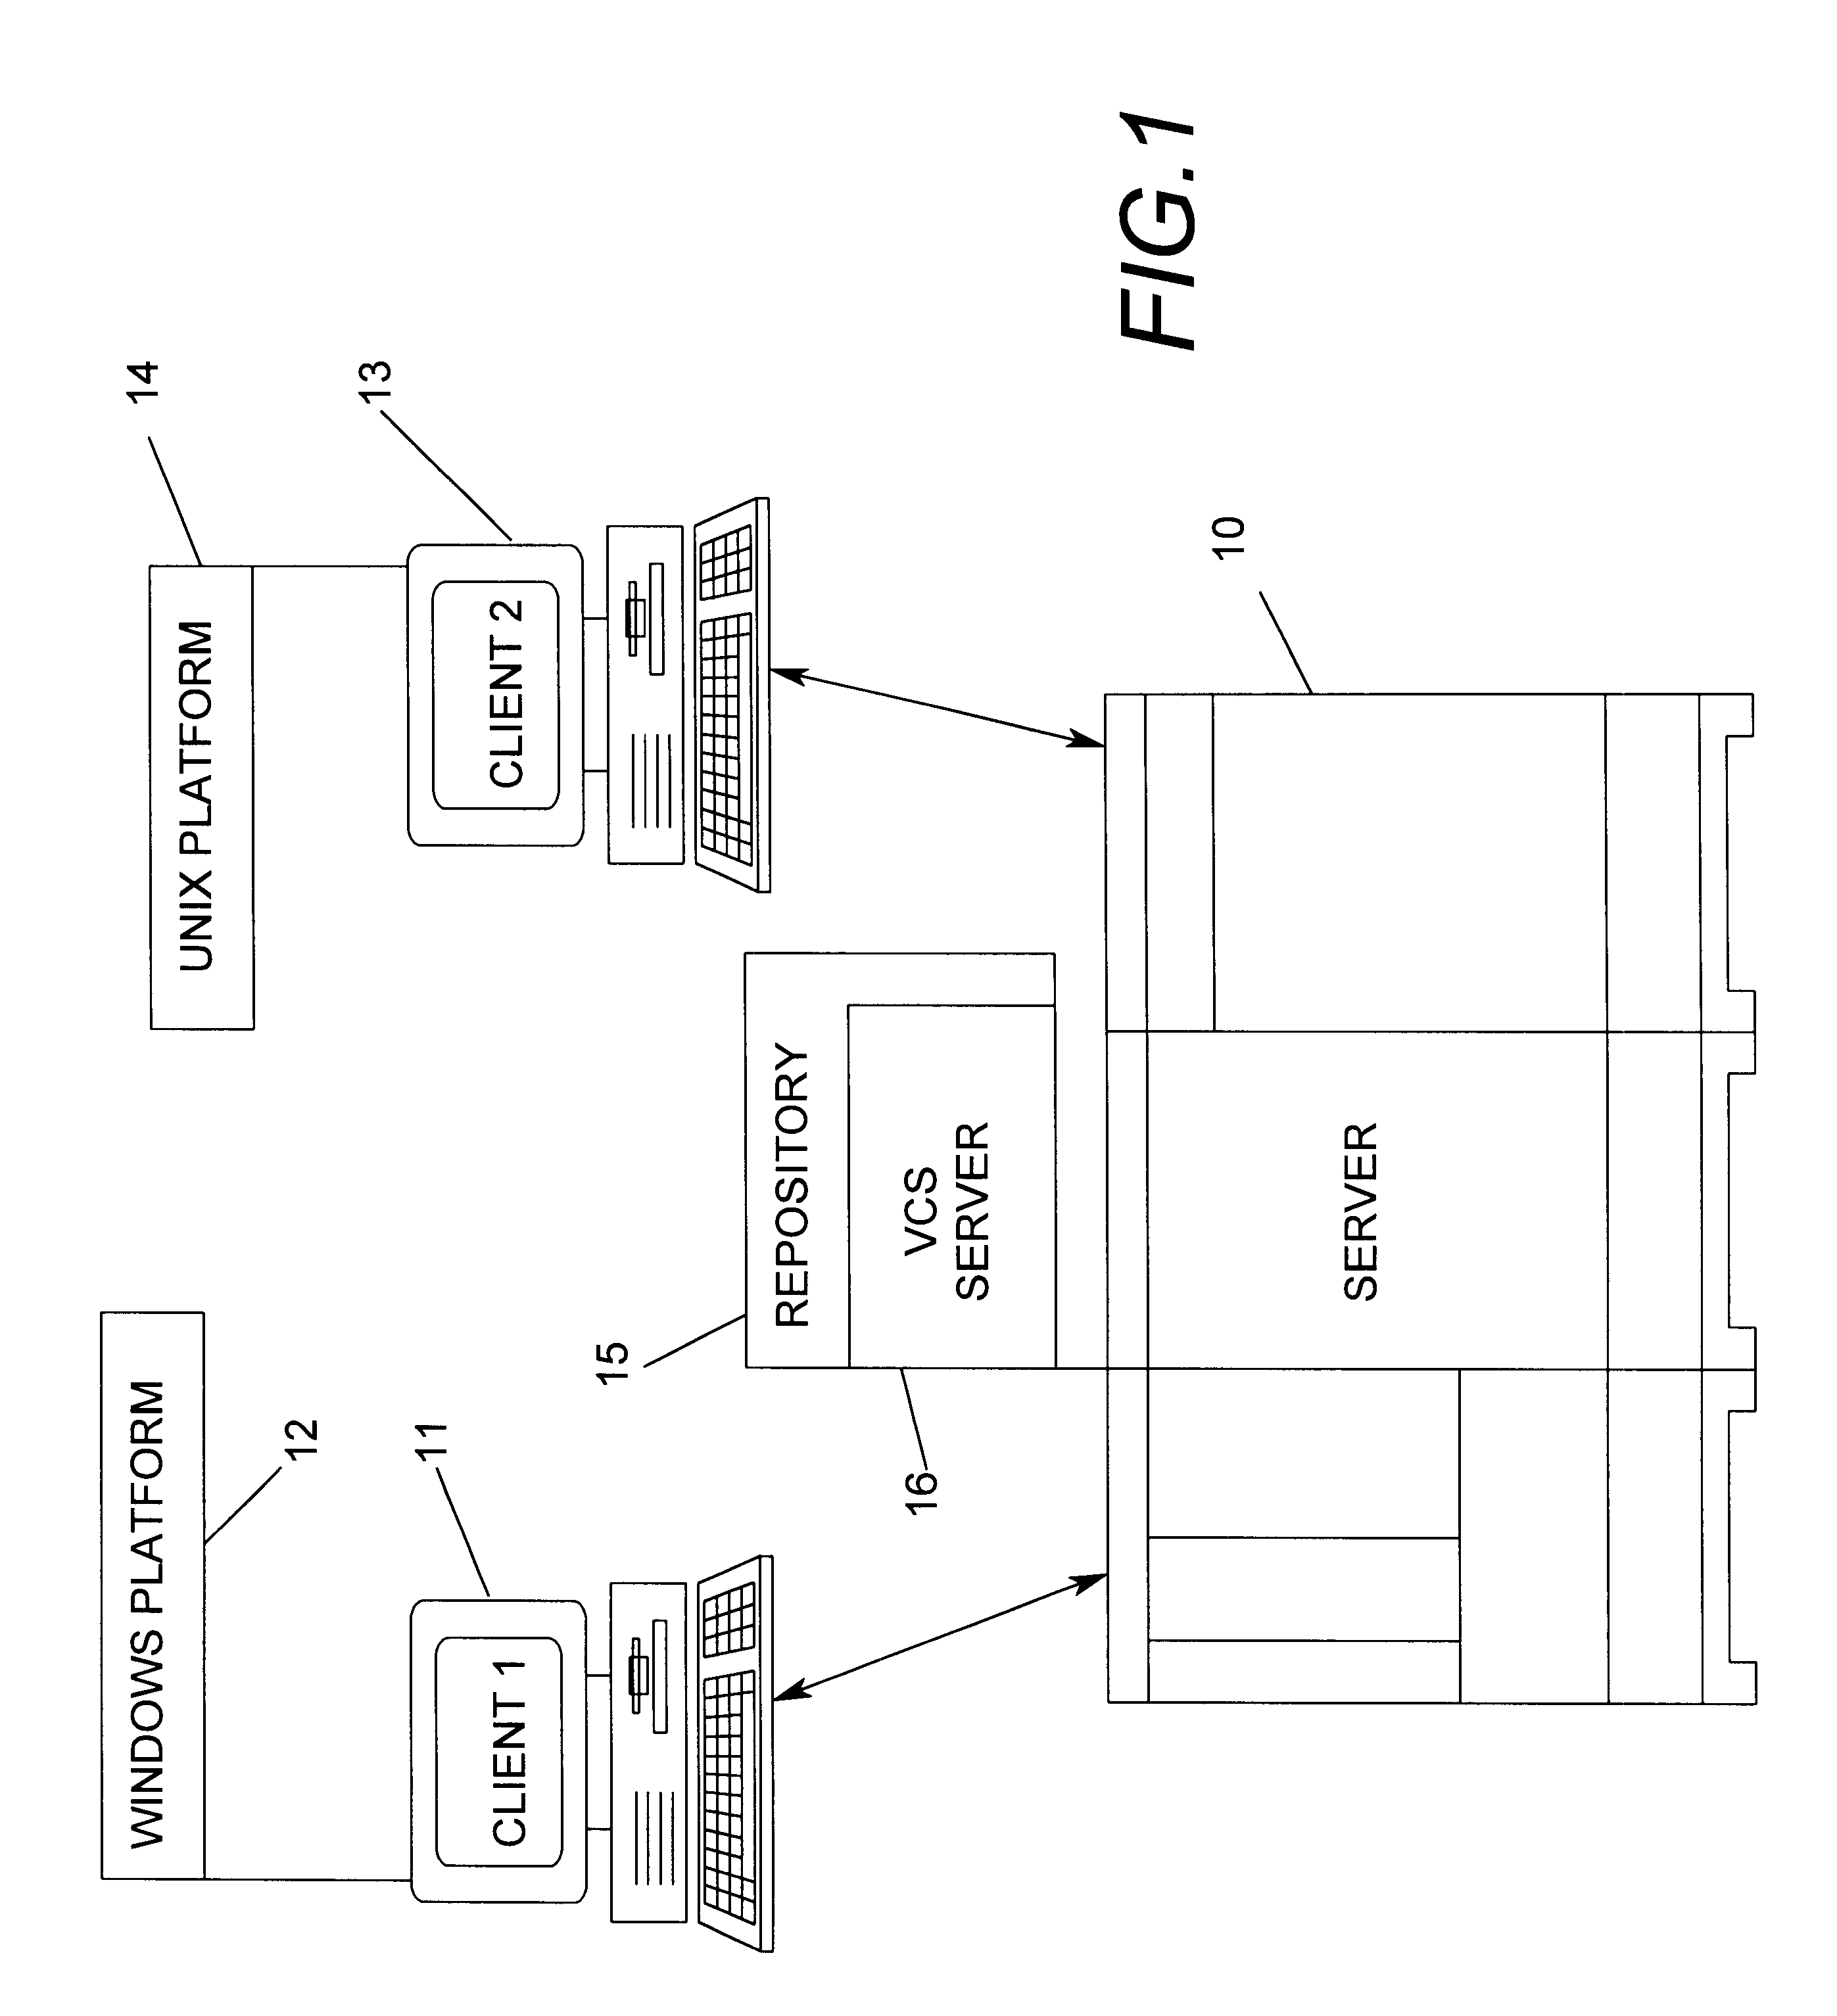 Method and system for creating and manipulating extensions to version control systems